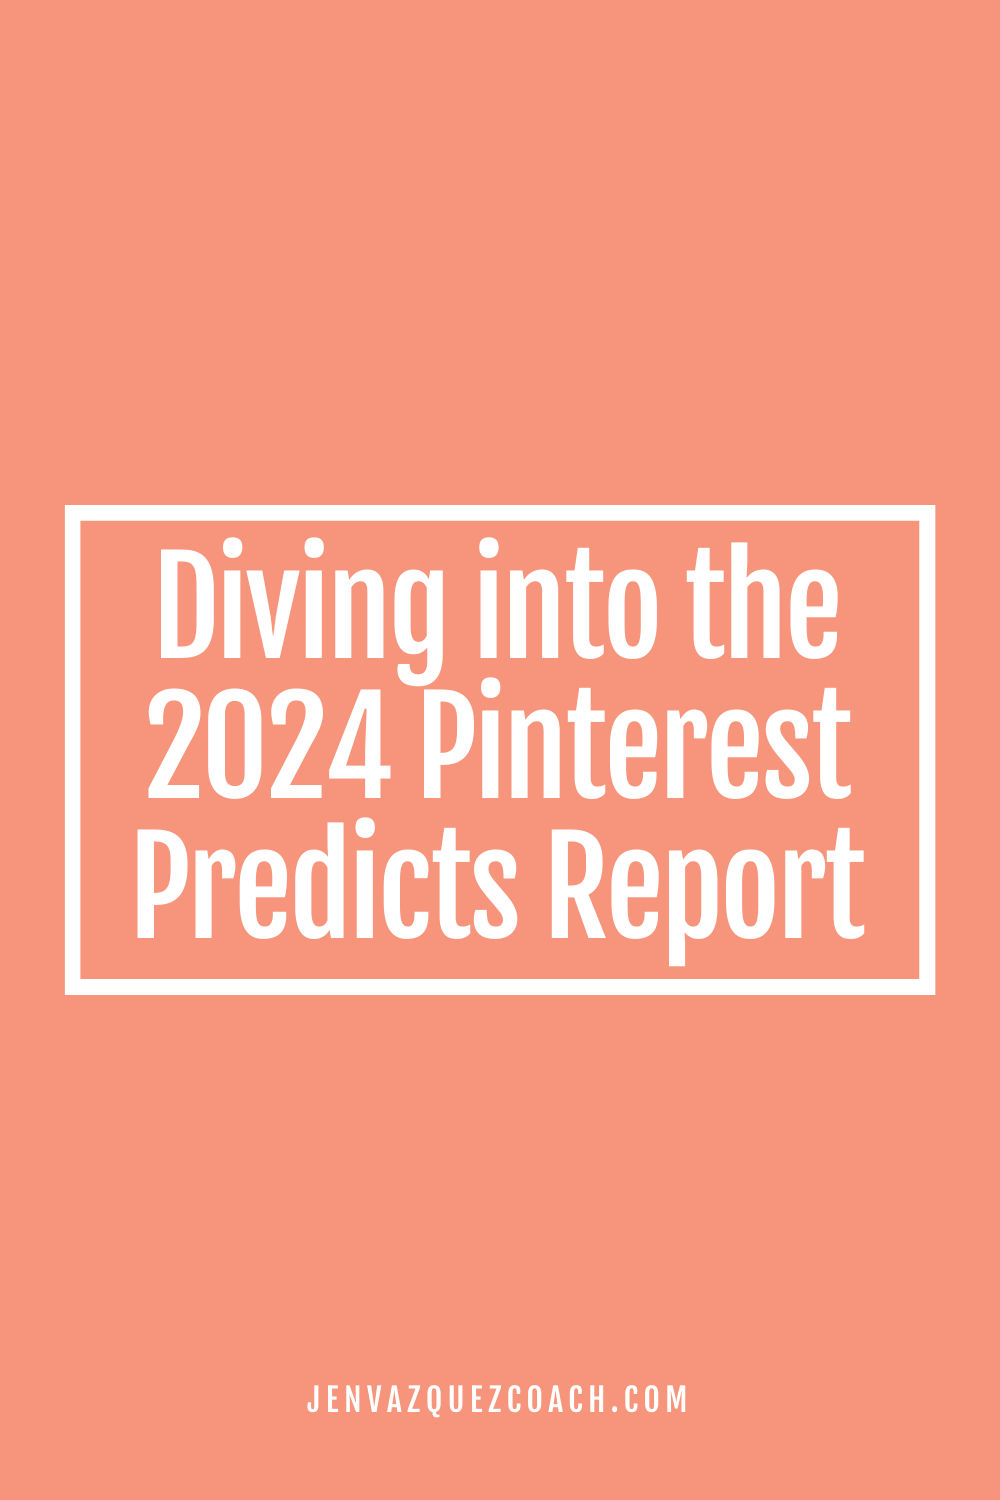 pinterest pin with writing "Diving into the 2024 Pinterest Predicts Report Pins"